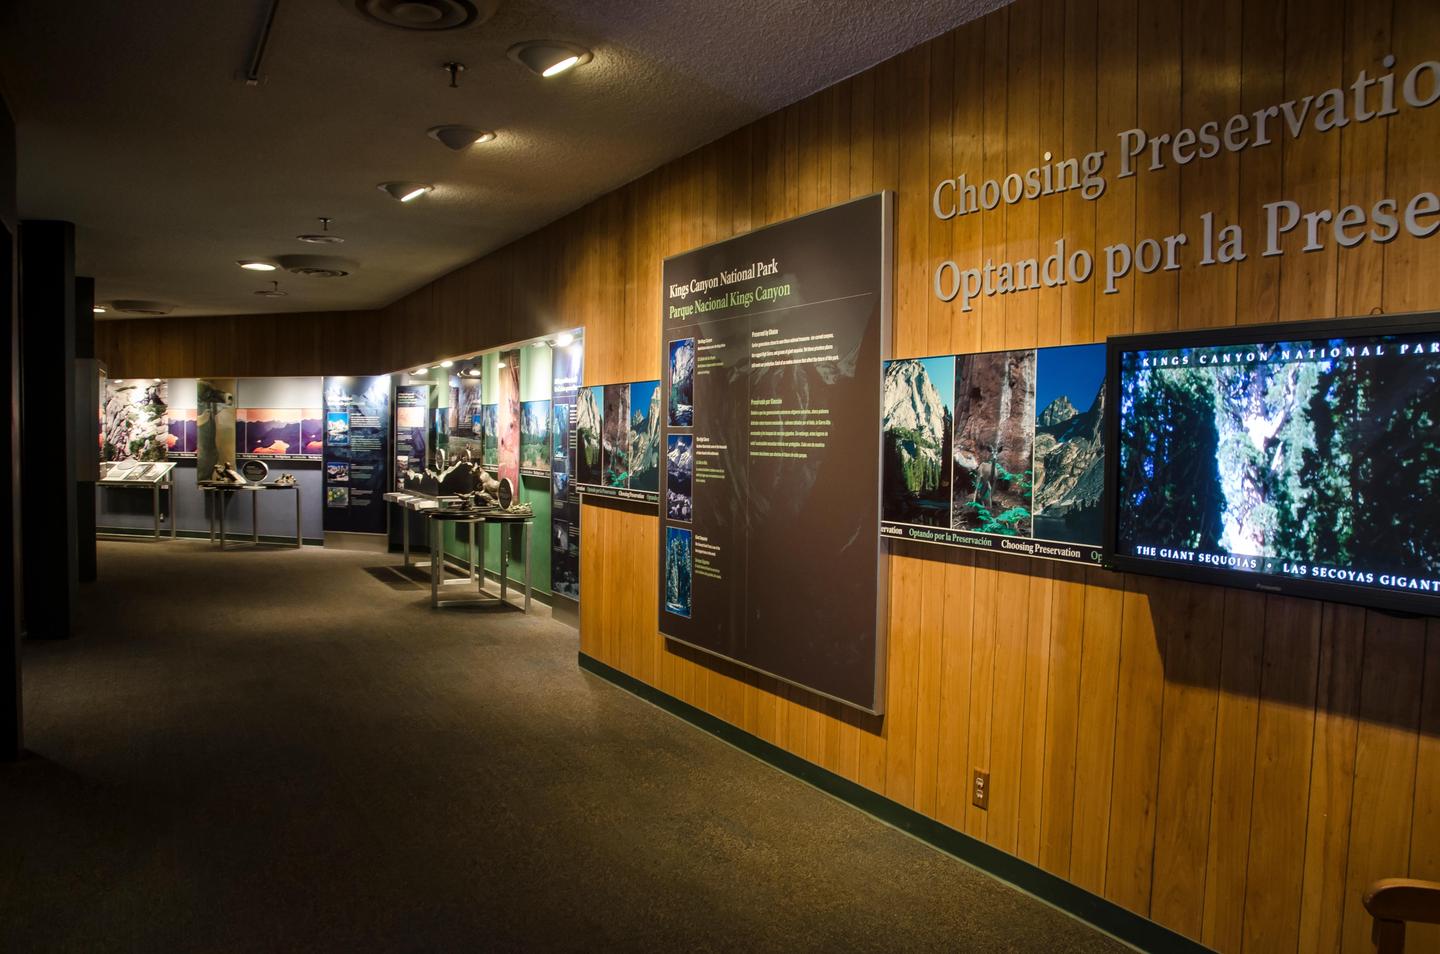 Kings Canyon Visitor CenterThe visitor center features several exhibits, including videos, tactile exhibits, and a movie theater.